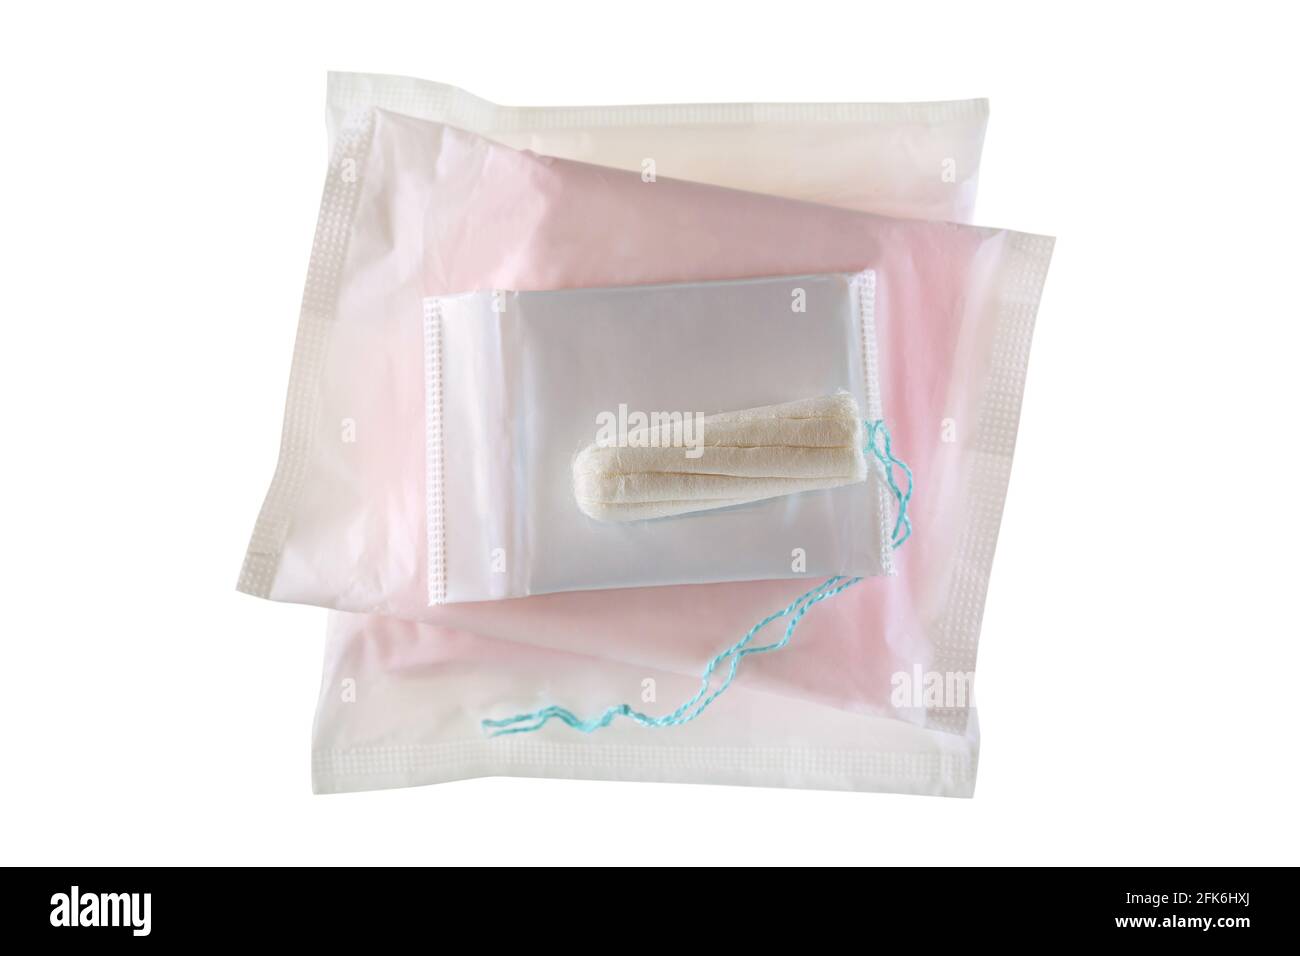 Period sanitary pad Cut Out Stock Images & Pictures - Alamy